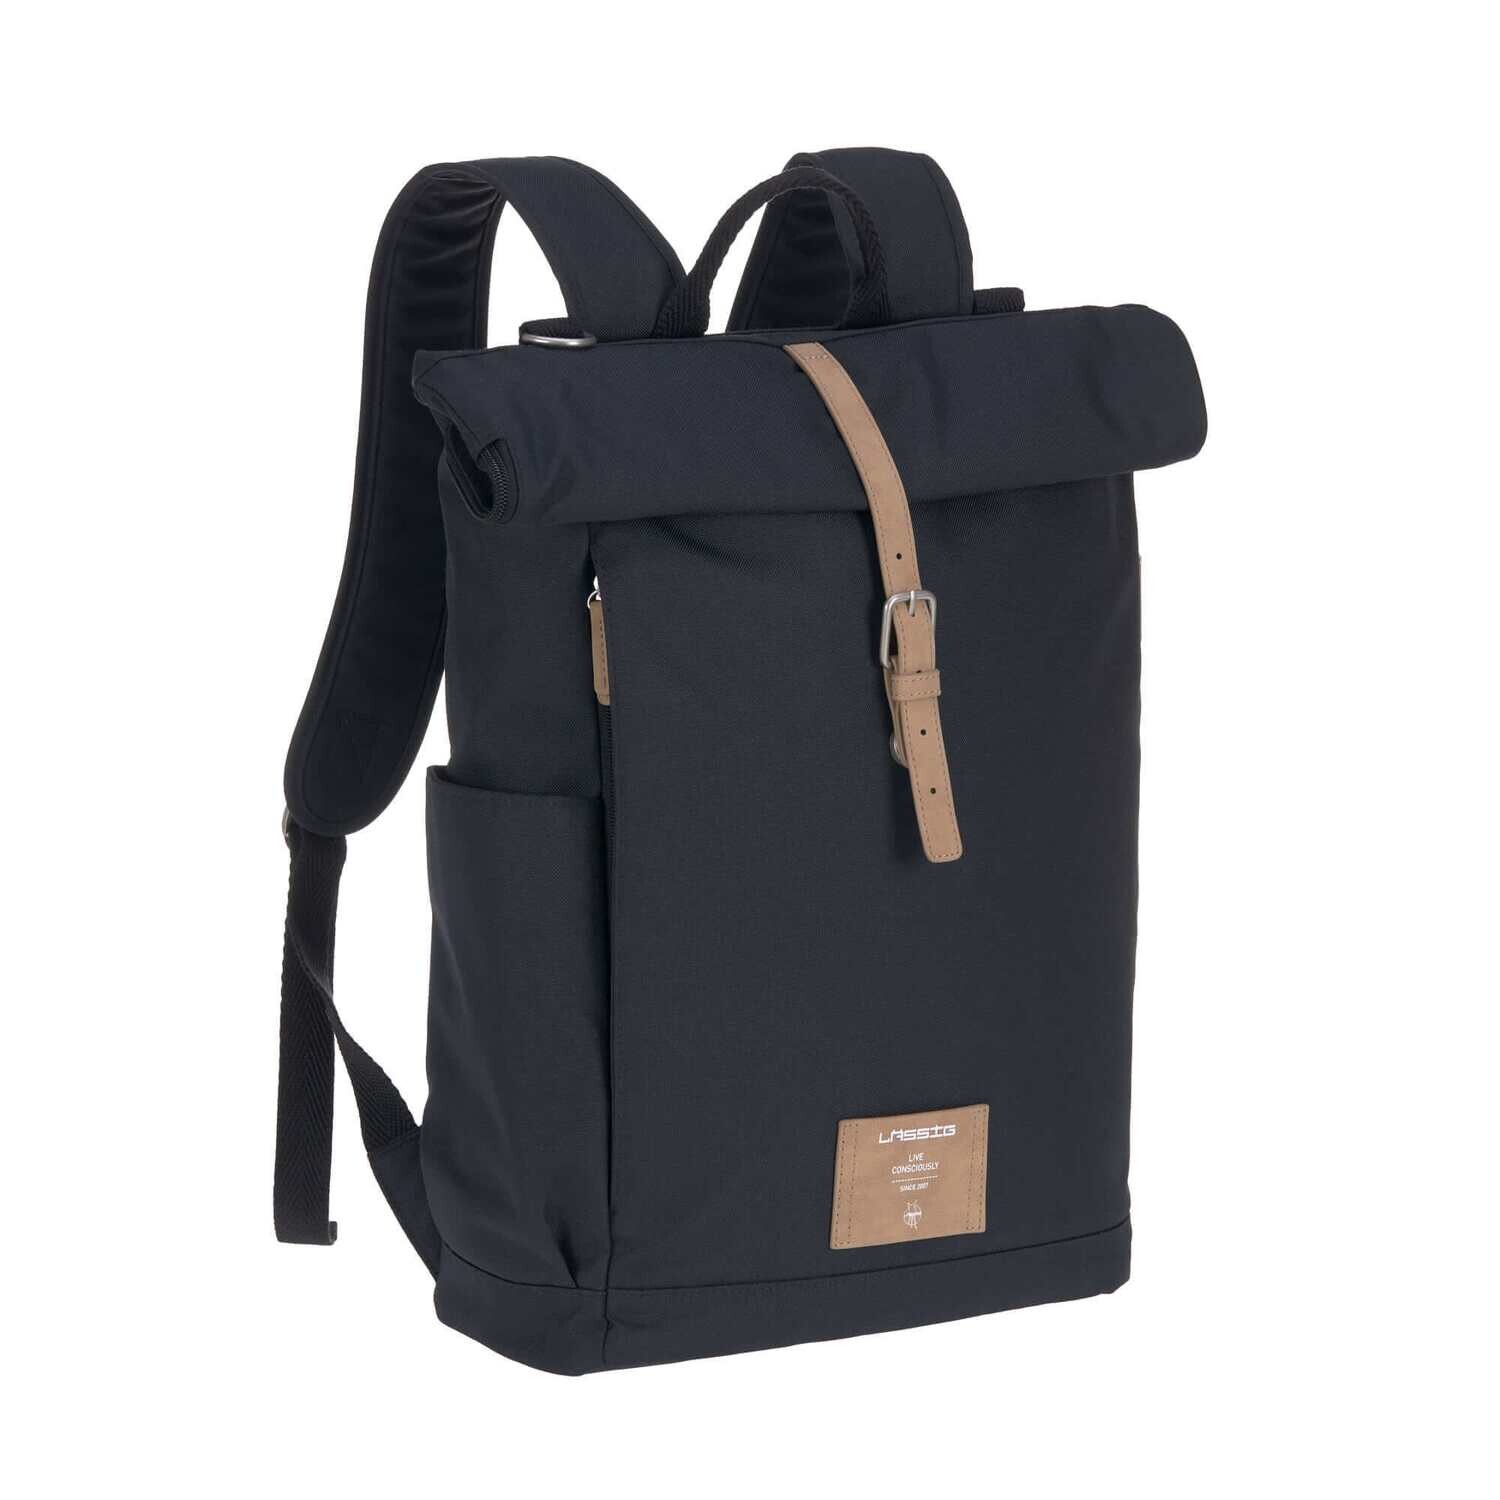 Rolltop Backpack Diaper Bag (made of 100% recycled polyester fabric)